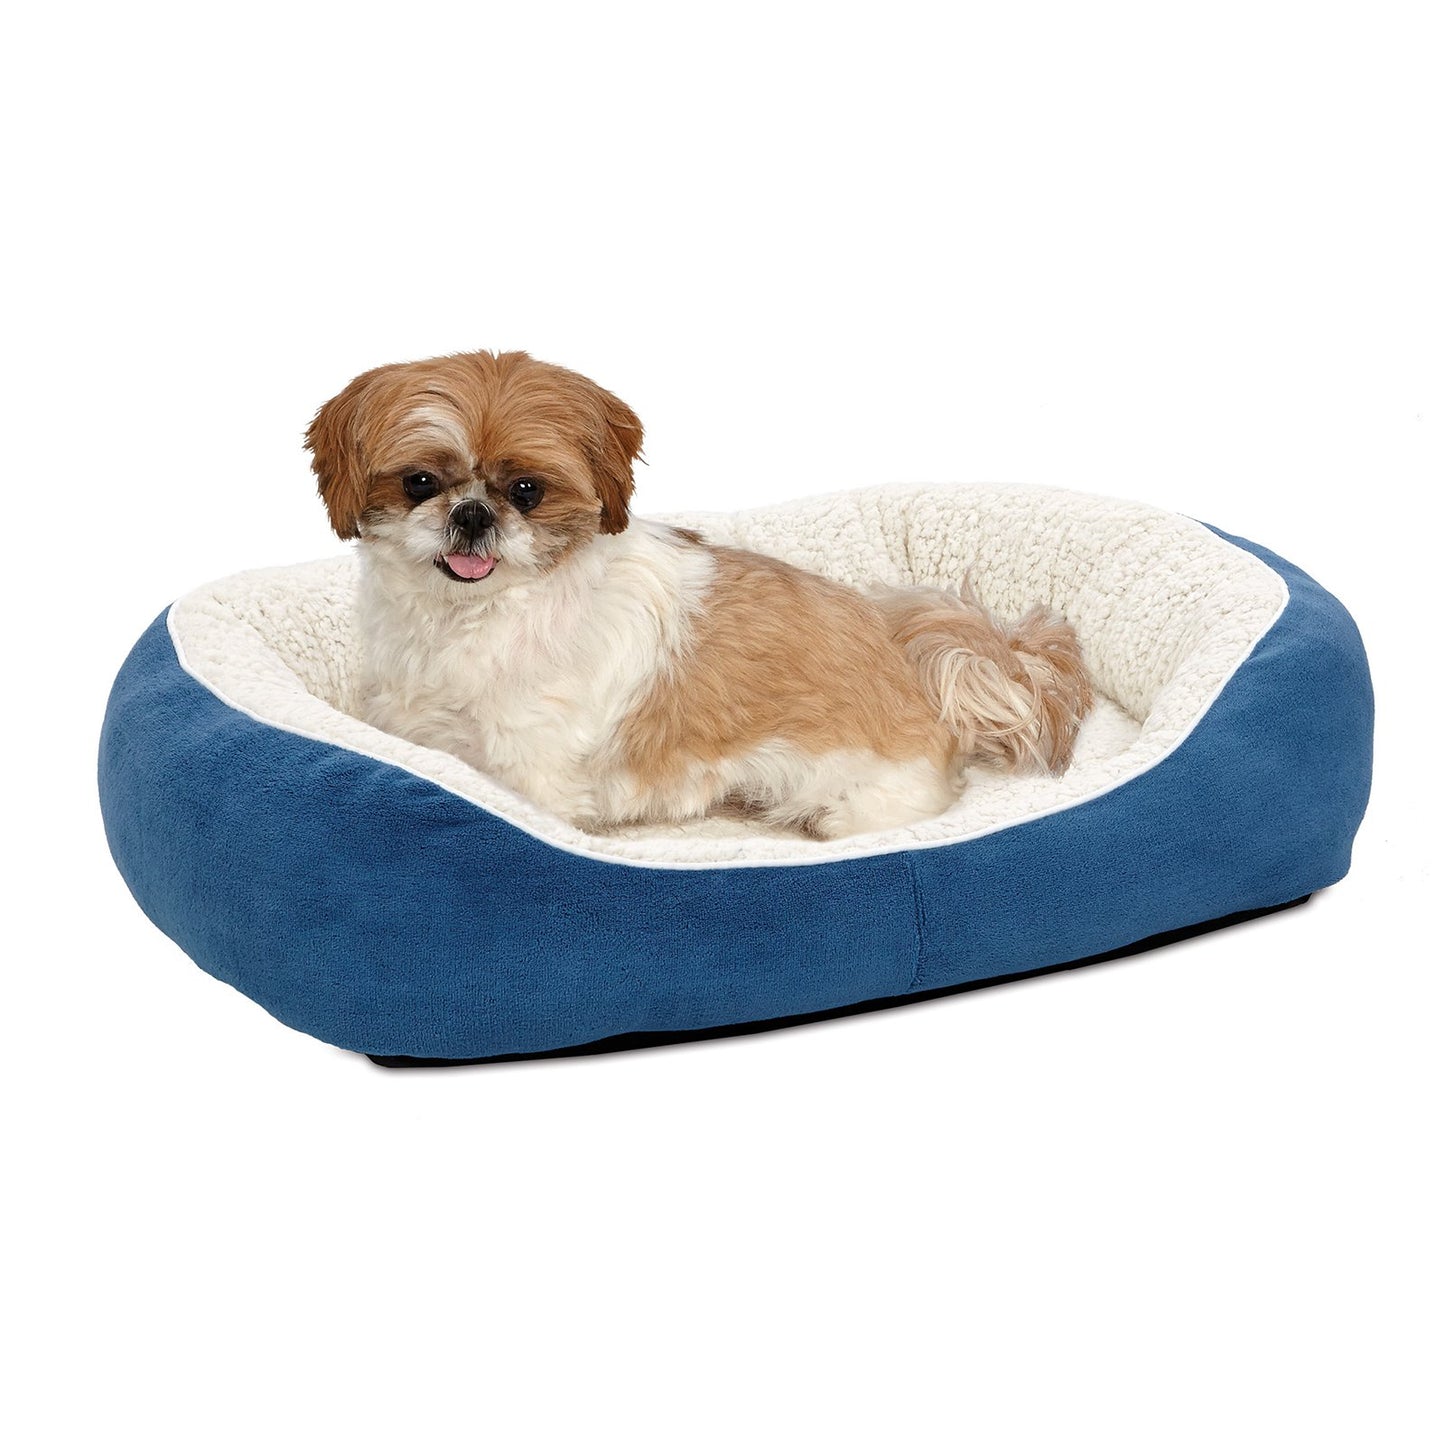 Overstuffed Micro-Terry Cuddle Pet Bed for Small Dogs & Cats, Blue